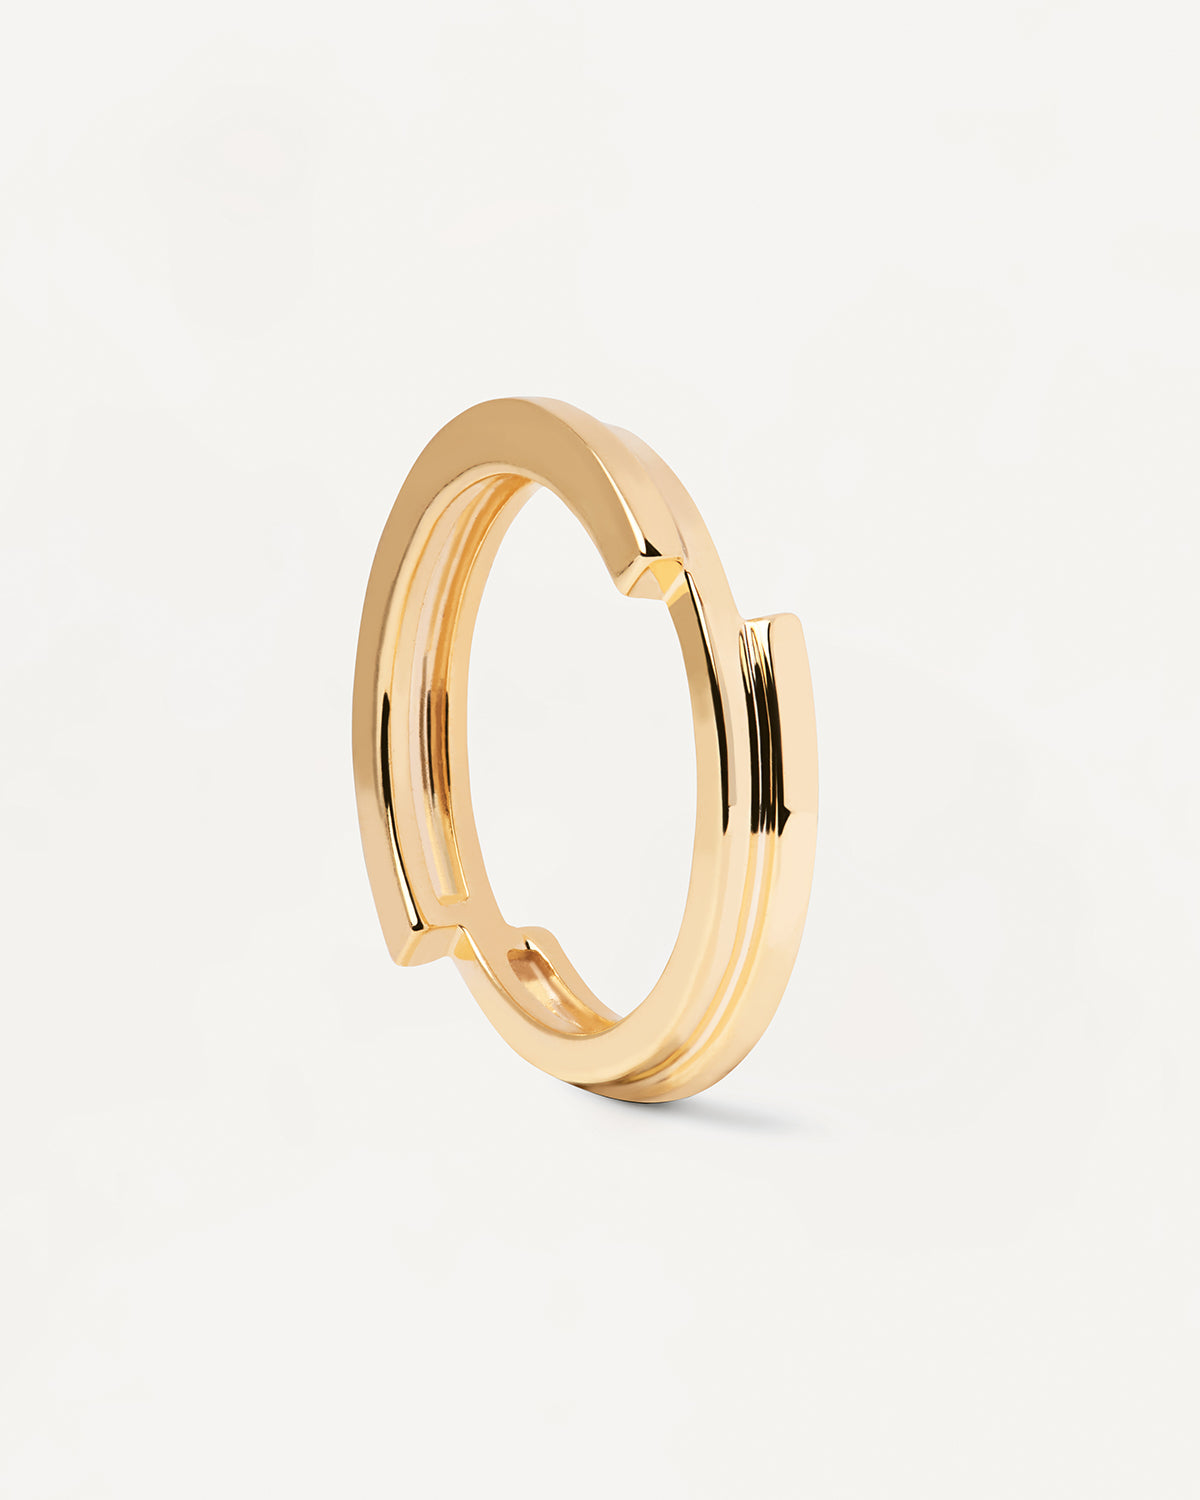 2023 Selection | Genesis Ring. Gold-plated silver plain ring with asymetric design. Get the latest arrival from PDPAOLA. Place your order safely and get this Best Seller. Free Shipping.